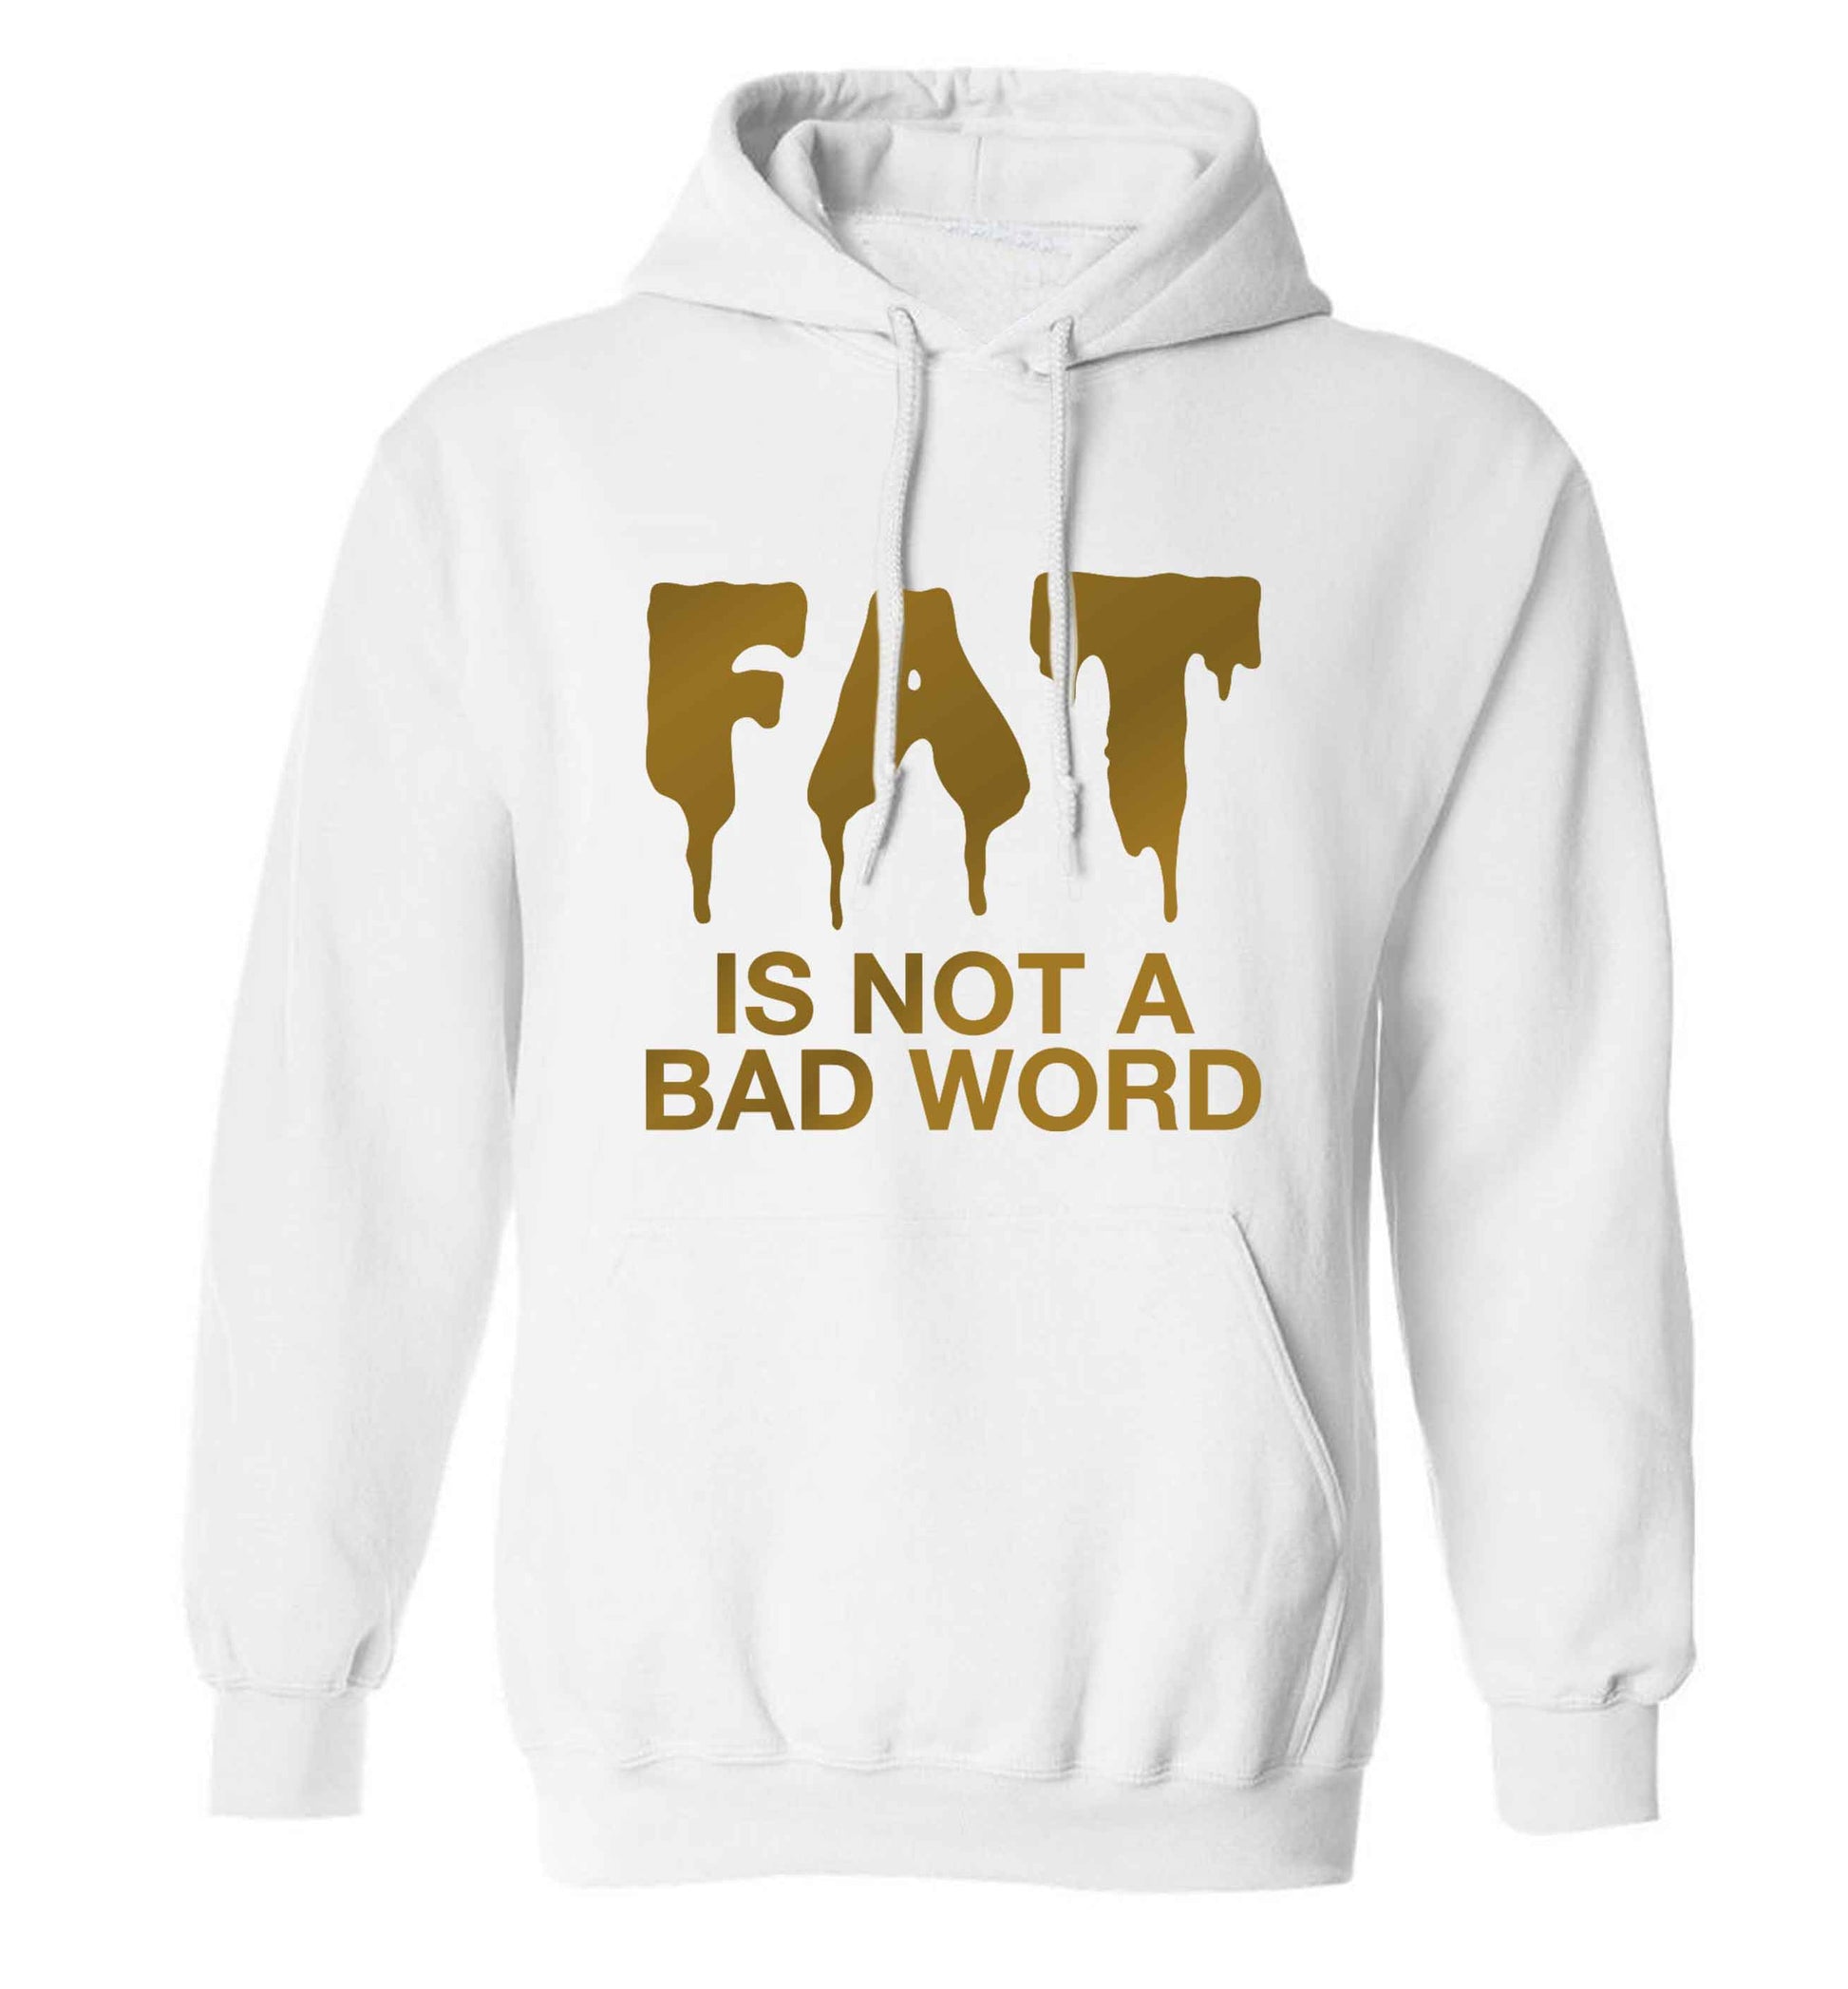 Fat is not a bad word adults unisex white hoodie 2XL